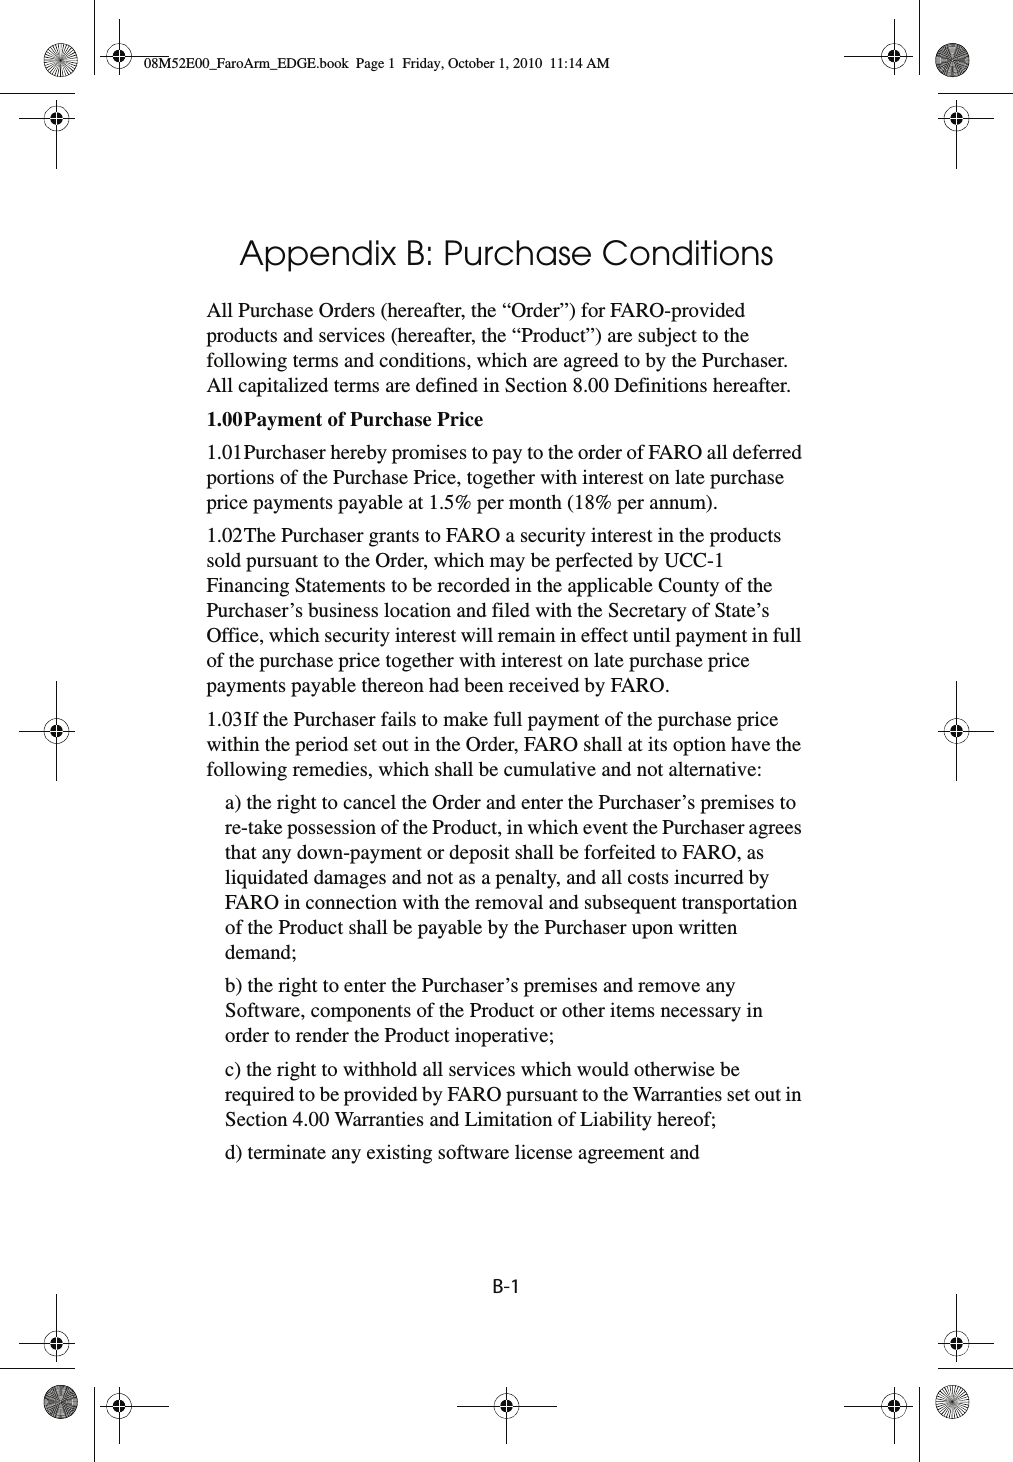 B-1Appendix B: Purchase ConditionsAll Purchase Orders (hereafter, the “Order”) for FARO-provided products and services (hereafter, the “Product”) are subject to the following terms and conditions, which are agreed to by the Purchaser. All capitalized terms are defined in Section 8.00 Definitions hereafter.1.00Payment of Purchase Price 1.01Purchaser hereby promises to pay to the order of FARO all deferred portions of the Purchase Price, together with interest on late purchase price payments payable at 1.5% per month (18% per annum).1.02The Purchaser grants to FARO a security interest in the products sold pursuant to the Order, which may be perfected by UCC-1 Financing Statements to be recorded in the applicable County of the Purchaser’s business location and filed with the Secretary of State’s Office, which security interest will remain in effect until payment in full of the purchase price together with interest on late purchase price payments payable thereon had been received by FARO.1.03If the Purchaser fails to make full payment of the purchase price within the period set out in the Order, FARO shall at its option have the following remedies, which shall be cumulative and not alternative:a) the right to cancel the Order and enter the Purchaser’s premises to re-take possession of the Product, in which event the Purchaser agrees that any down-payment or deposit shall be forfeited to FARO, as liquidated damages and not as a penalty, and all costs incurred by FARO in connection with the removal and subsequent transportation of the Product shall be payable by the Purchaser upon written demand;b) the right to enter the Purchaser’s premises and remove any Software, components of the Product or other items necessary in order to render the Product inoperative;c) the right to withhold all services which would otherwise be required to be provided by FARO pursuant to the Warranties set out in Section 4.00 Warranties and Limitation of Liability hereof;d) terminate any existing software license agreement and08M52E00_FaroArm_EDGE.book  Page 1  Friday, October 1, 2010  11:14 AM